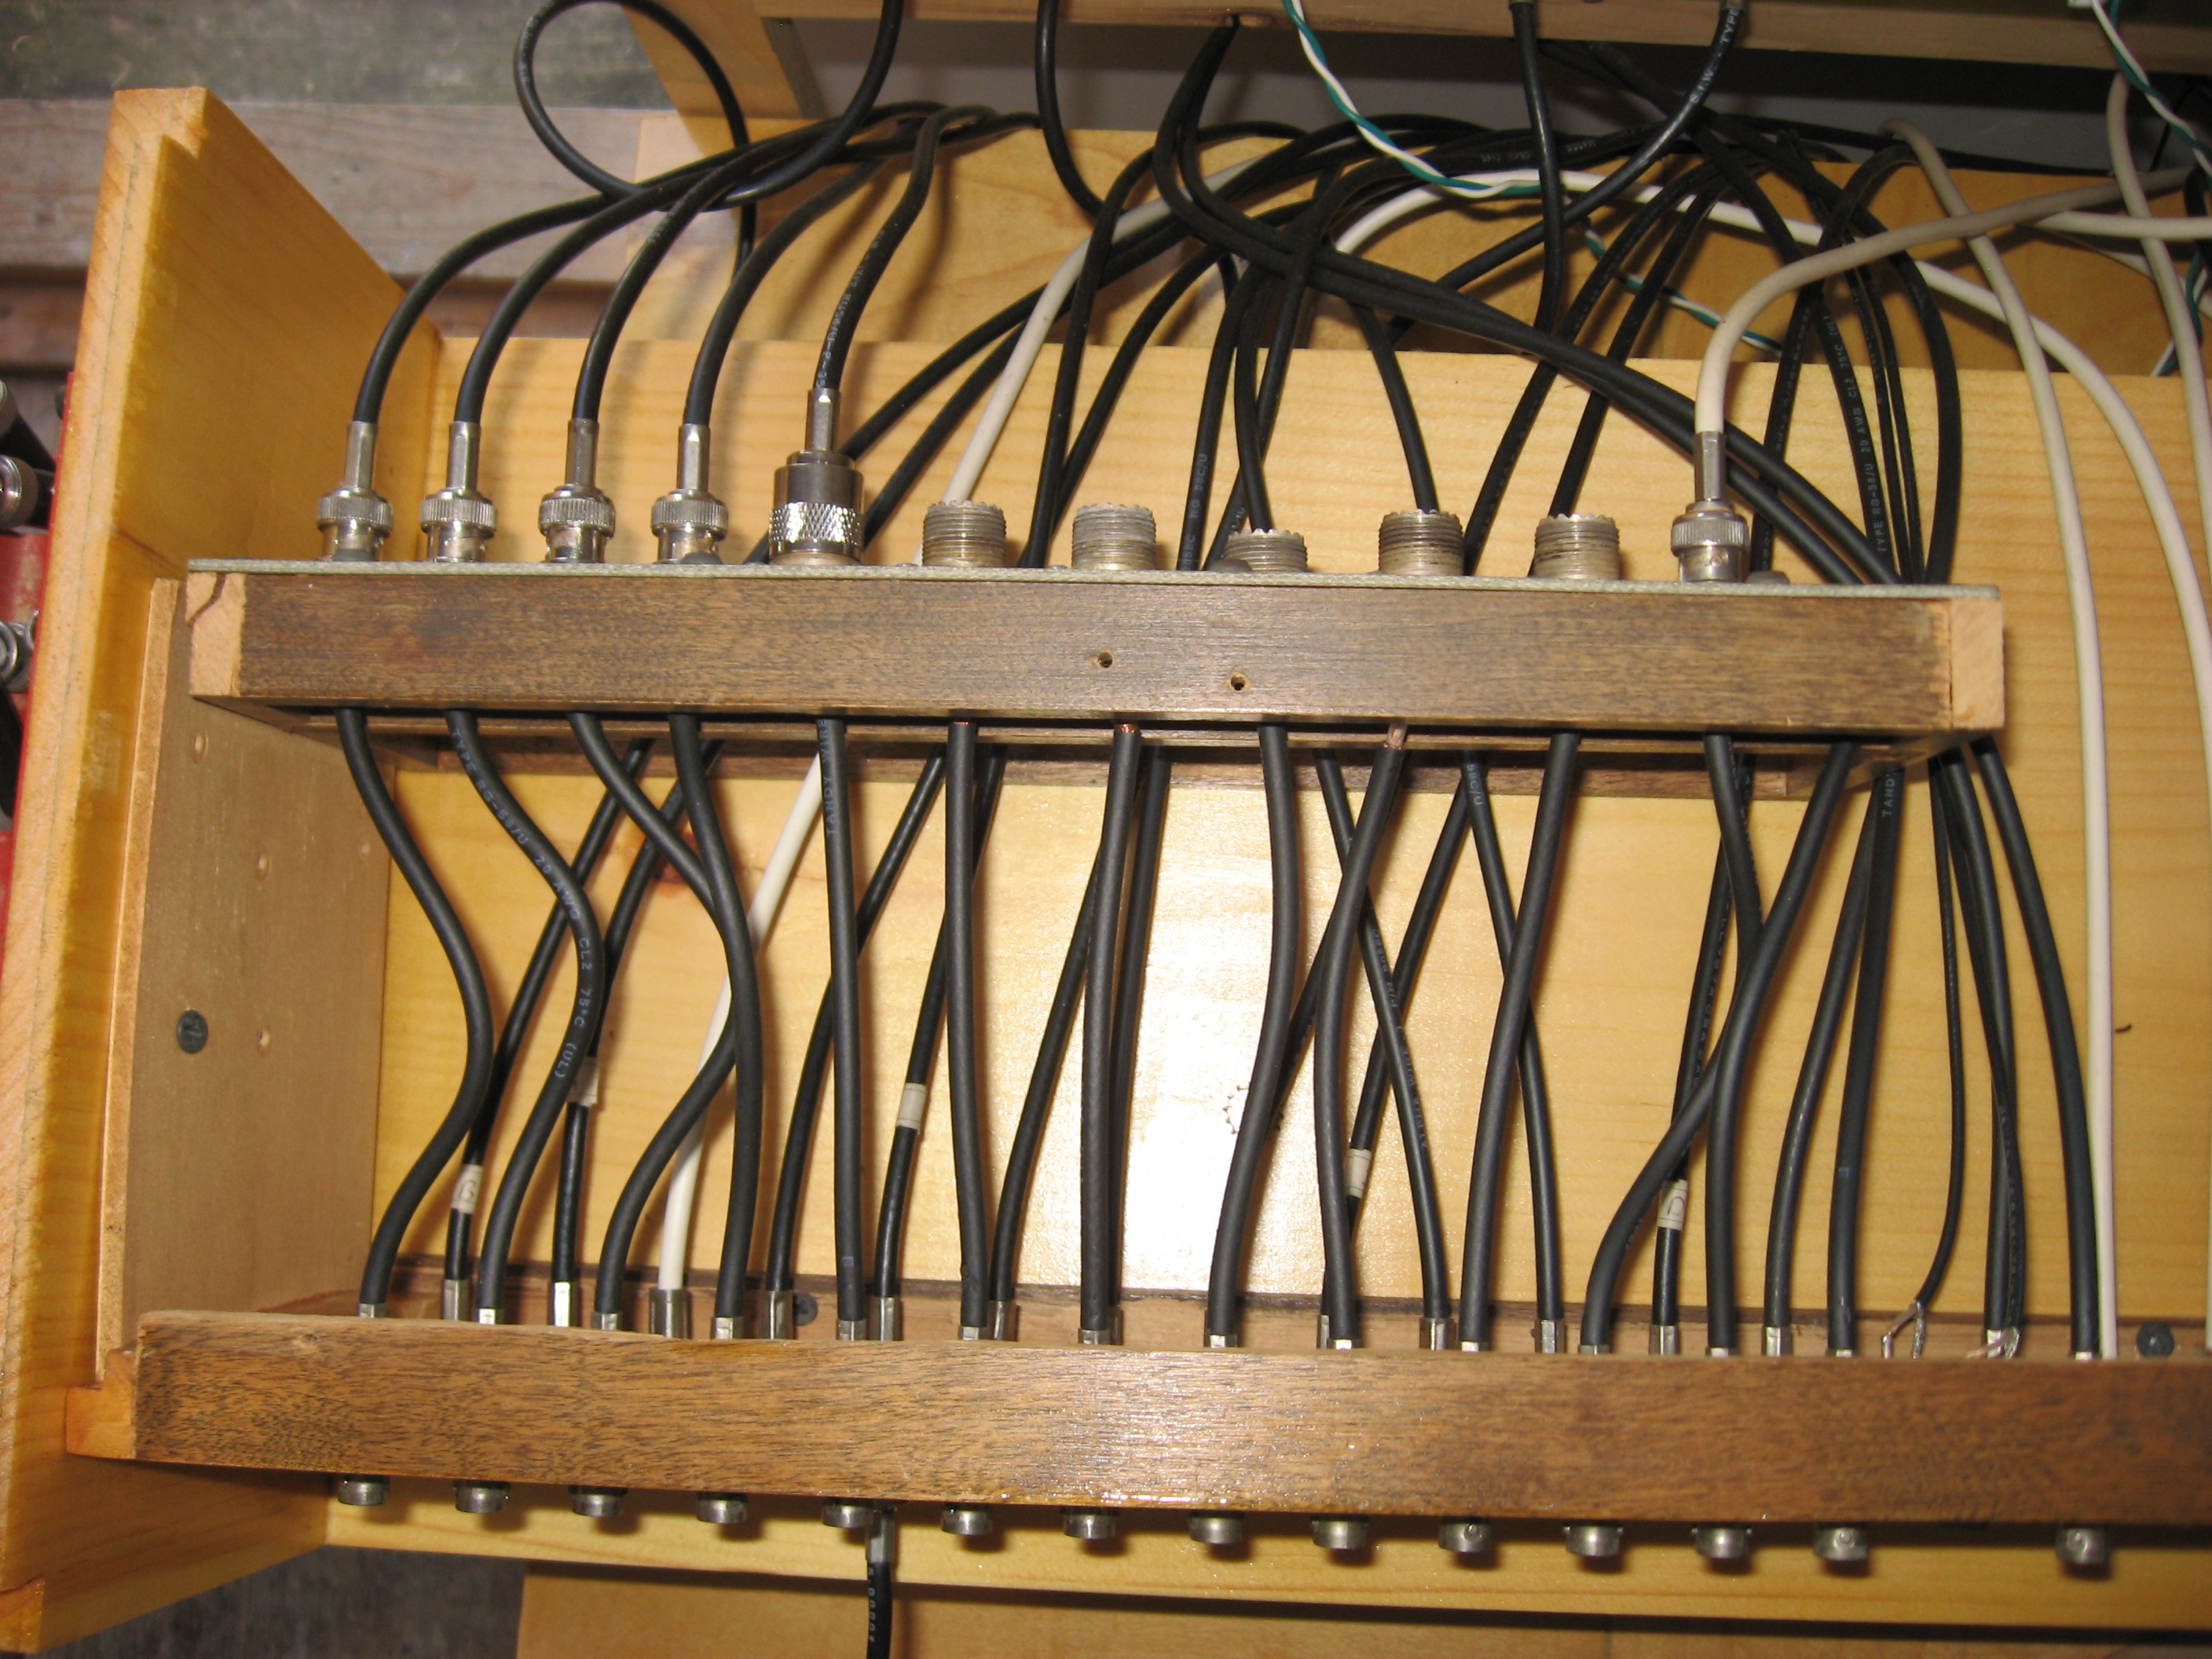 Internal View of the Lazure Operating Console RF Patch Panel